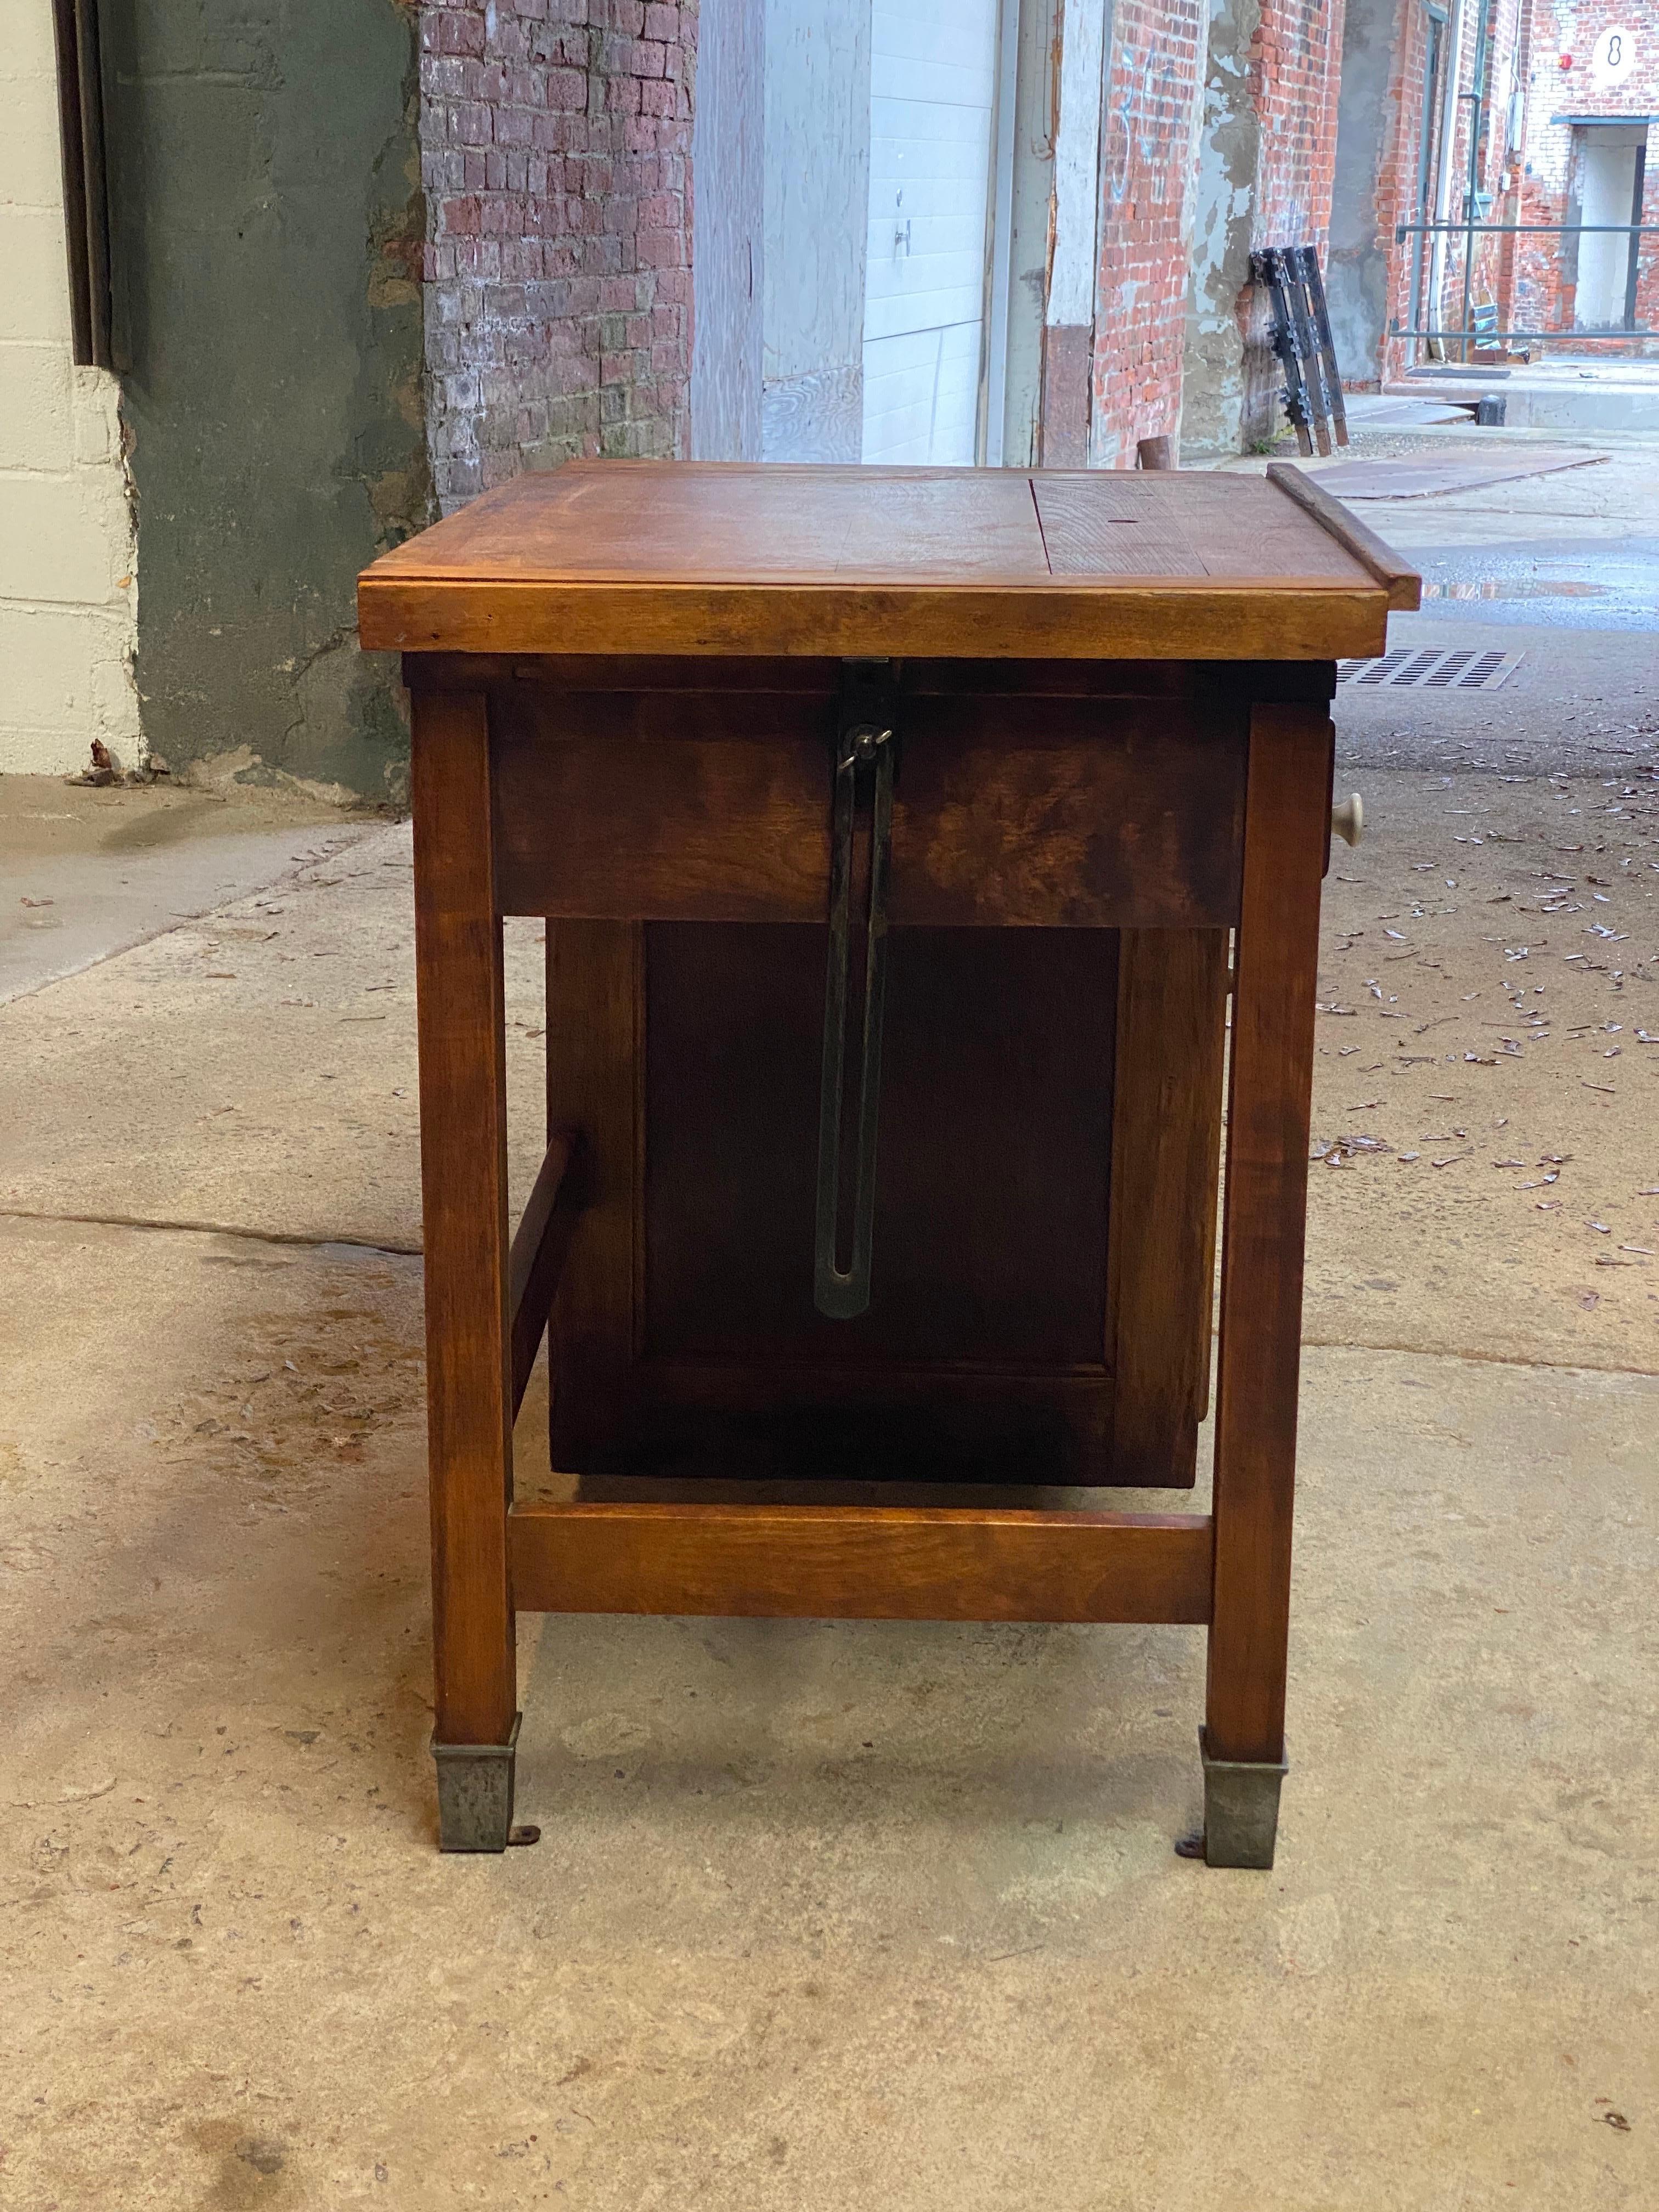 1930s Small Scale Industrial Drafting Table 1